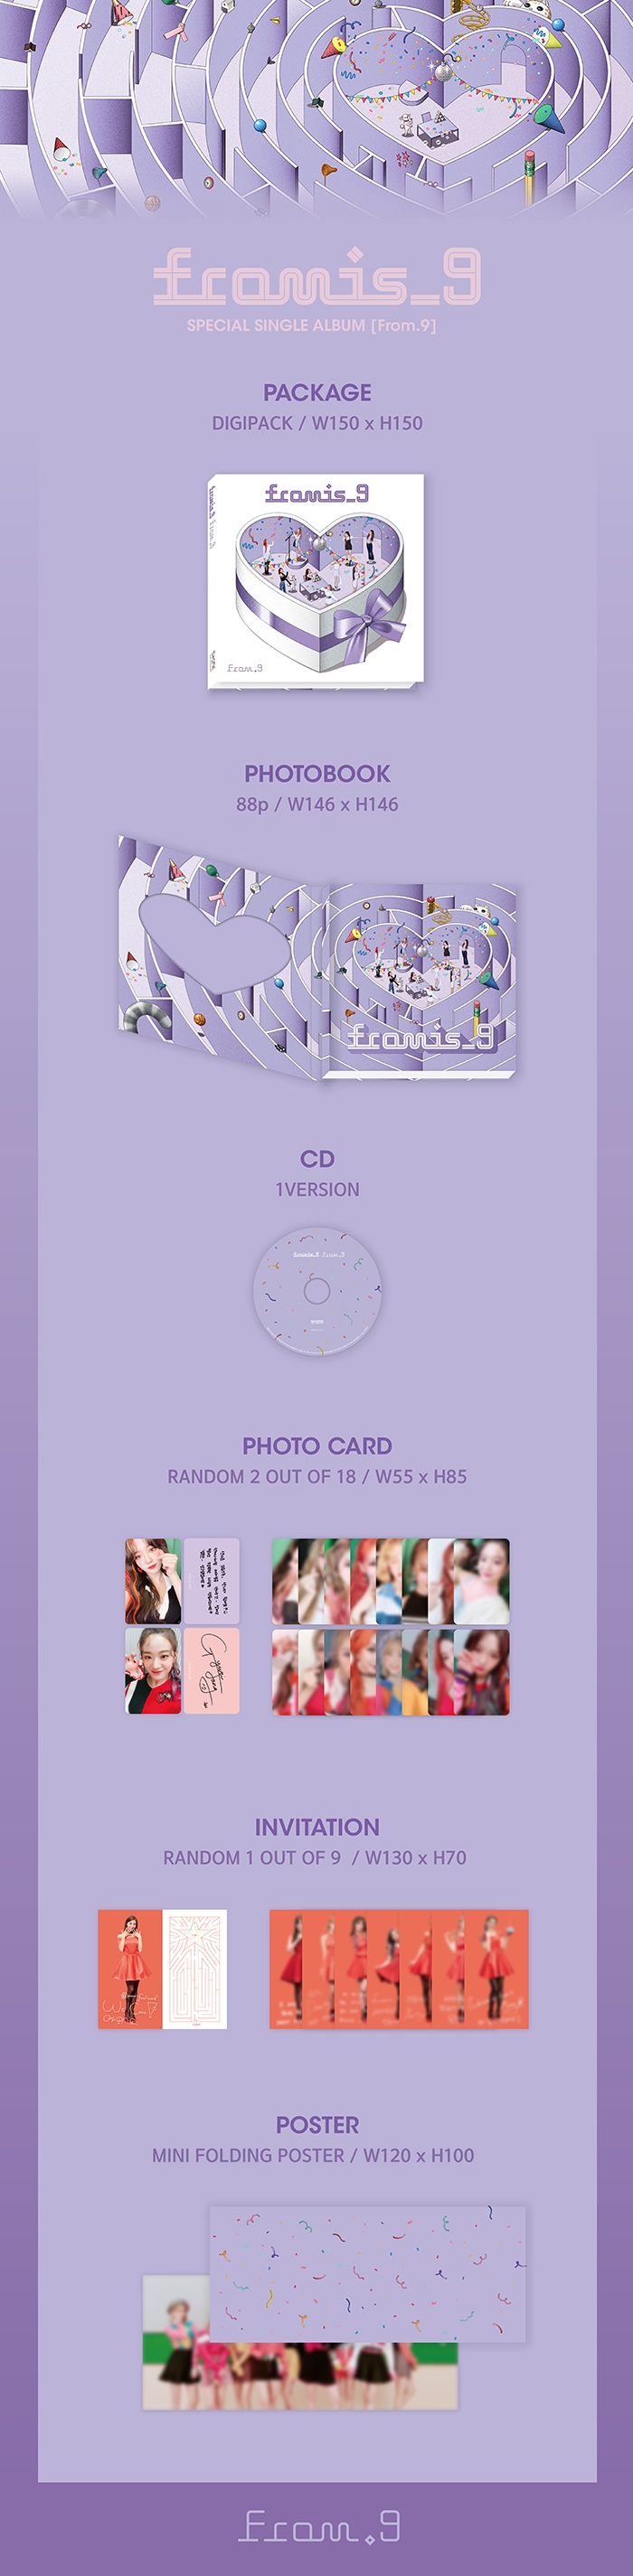 FROMIS_9   Special Single FROM9